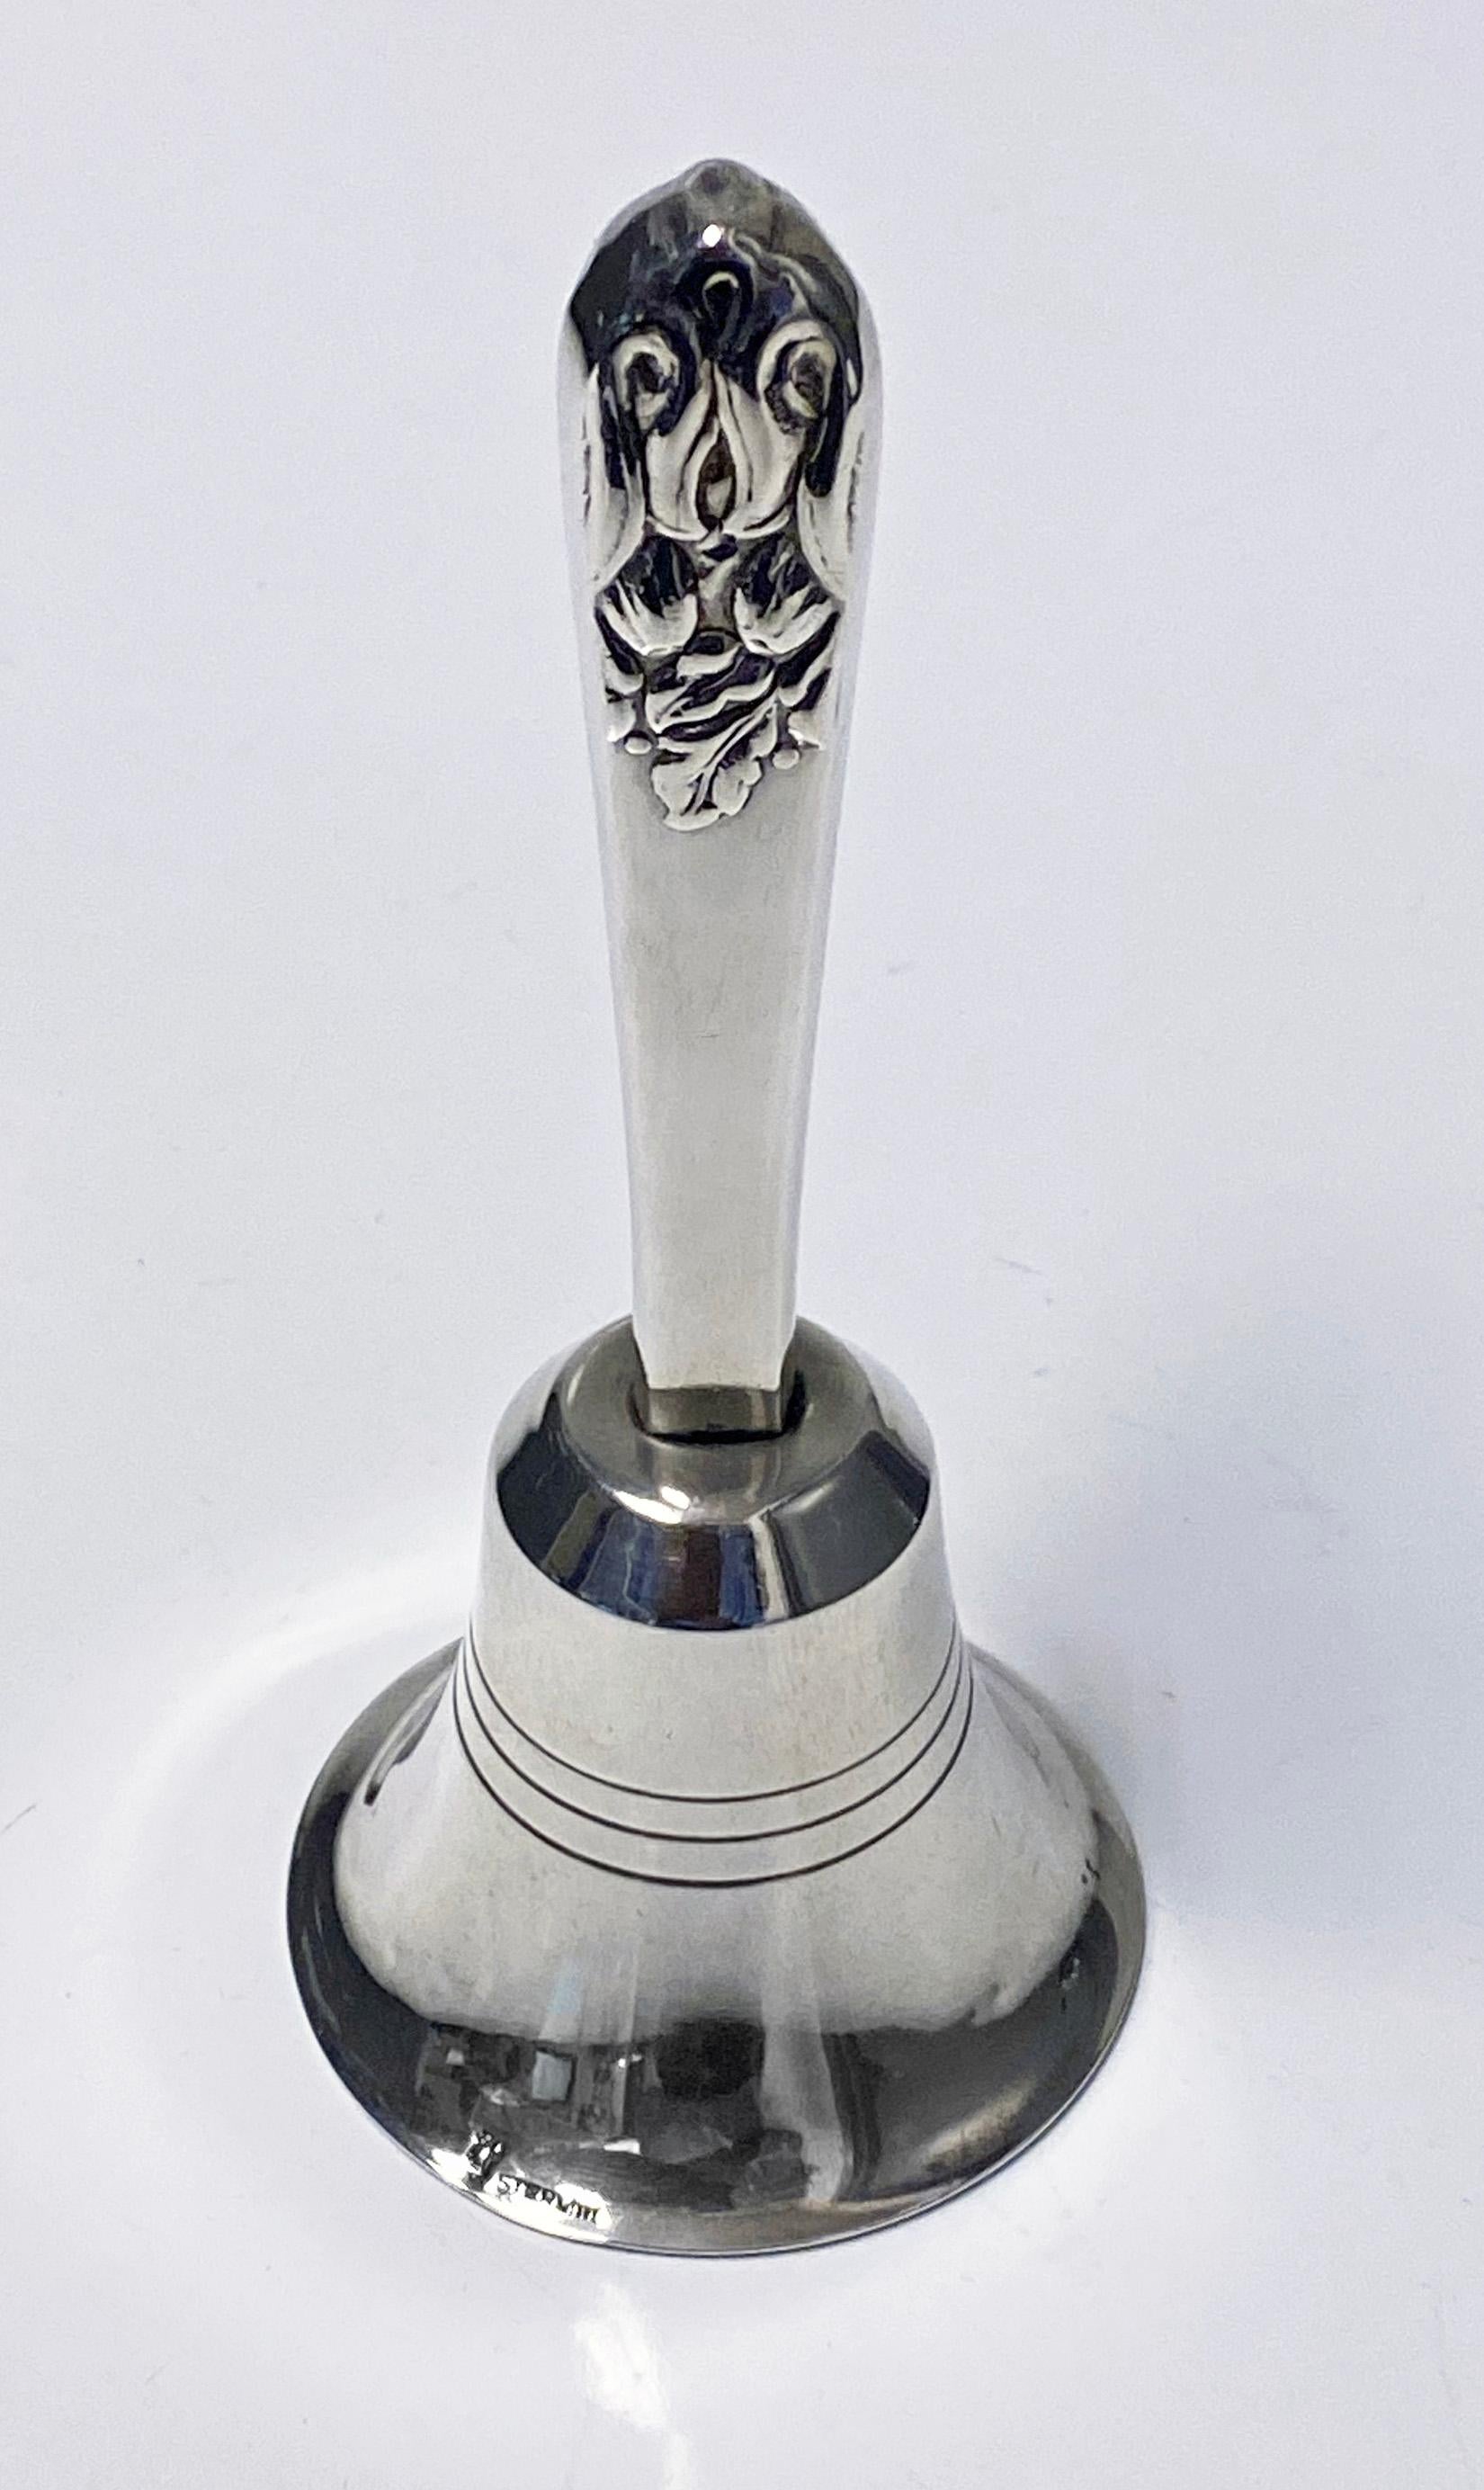 Sterling Table Hand Bell Carl Poul Petersen, Montreal C.1930. The Bell of a Danish Jensen style on flared dome base, the handle of blossom style. Stamped Sterling with Petersen marks. Height: 5 inches. Weight: 49.4 gm.